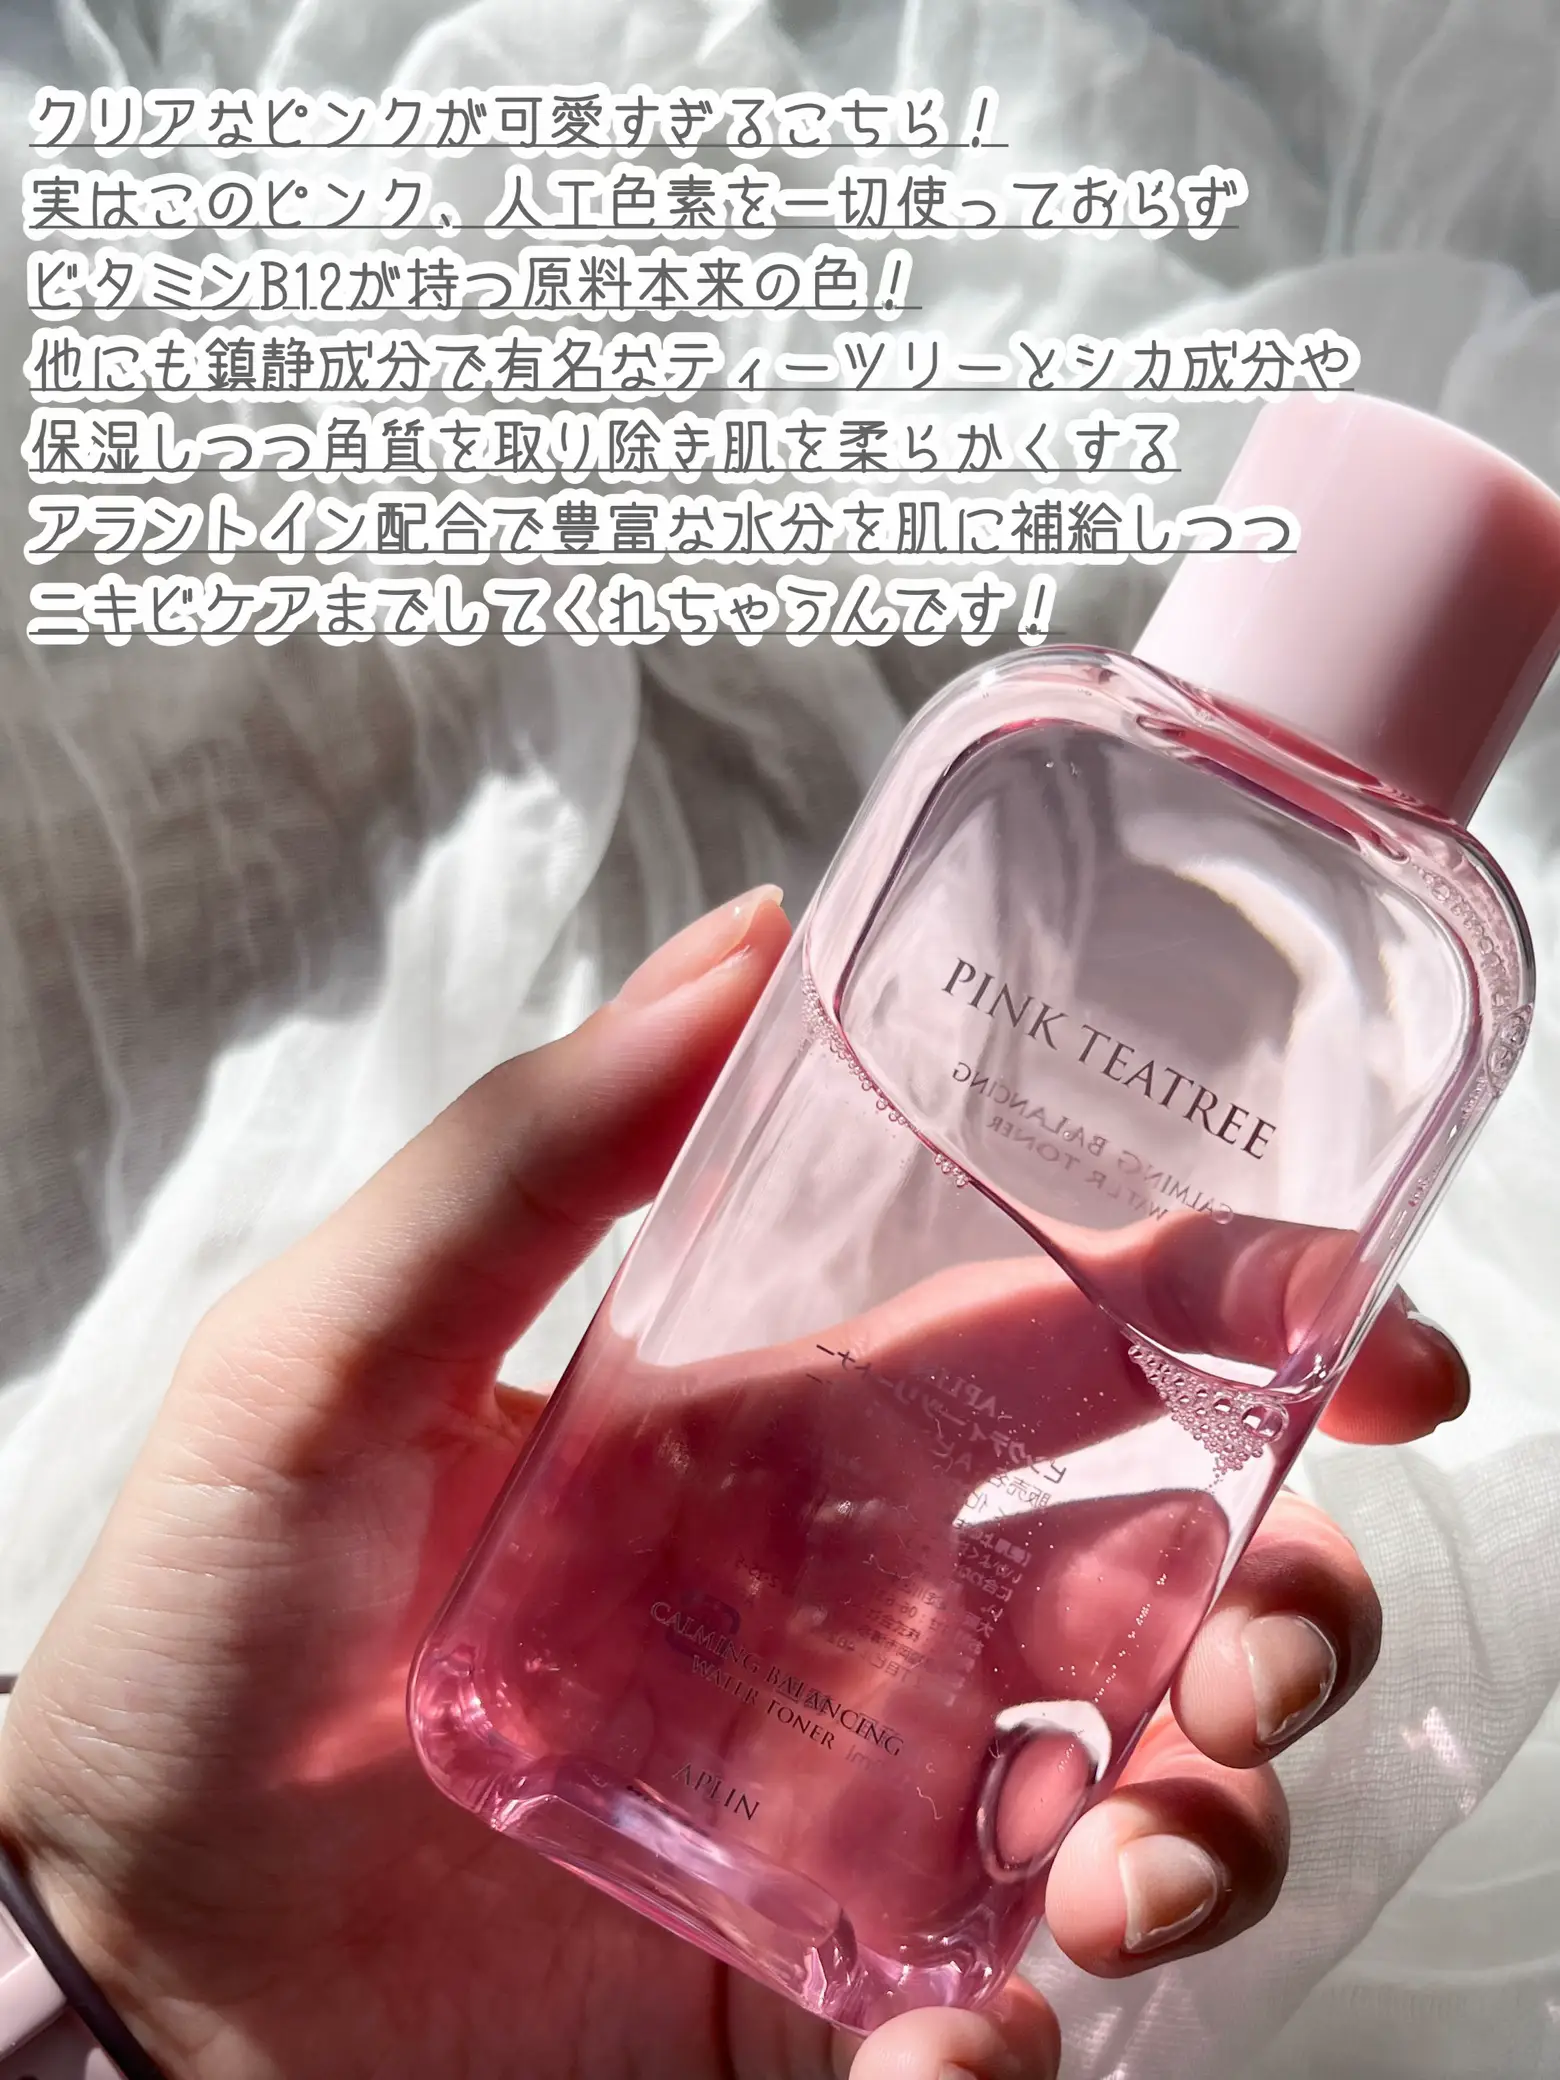 Mega Discount Recommended!] Pink soothing toner recommended